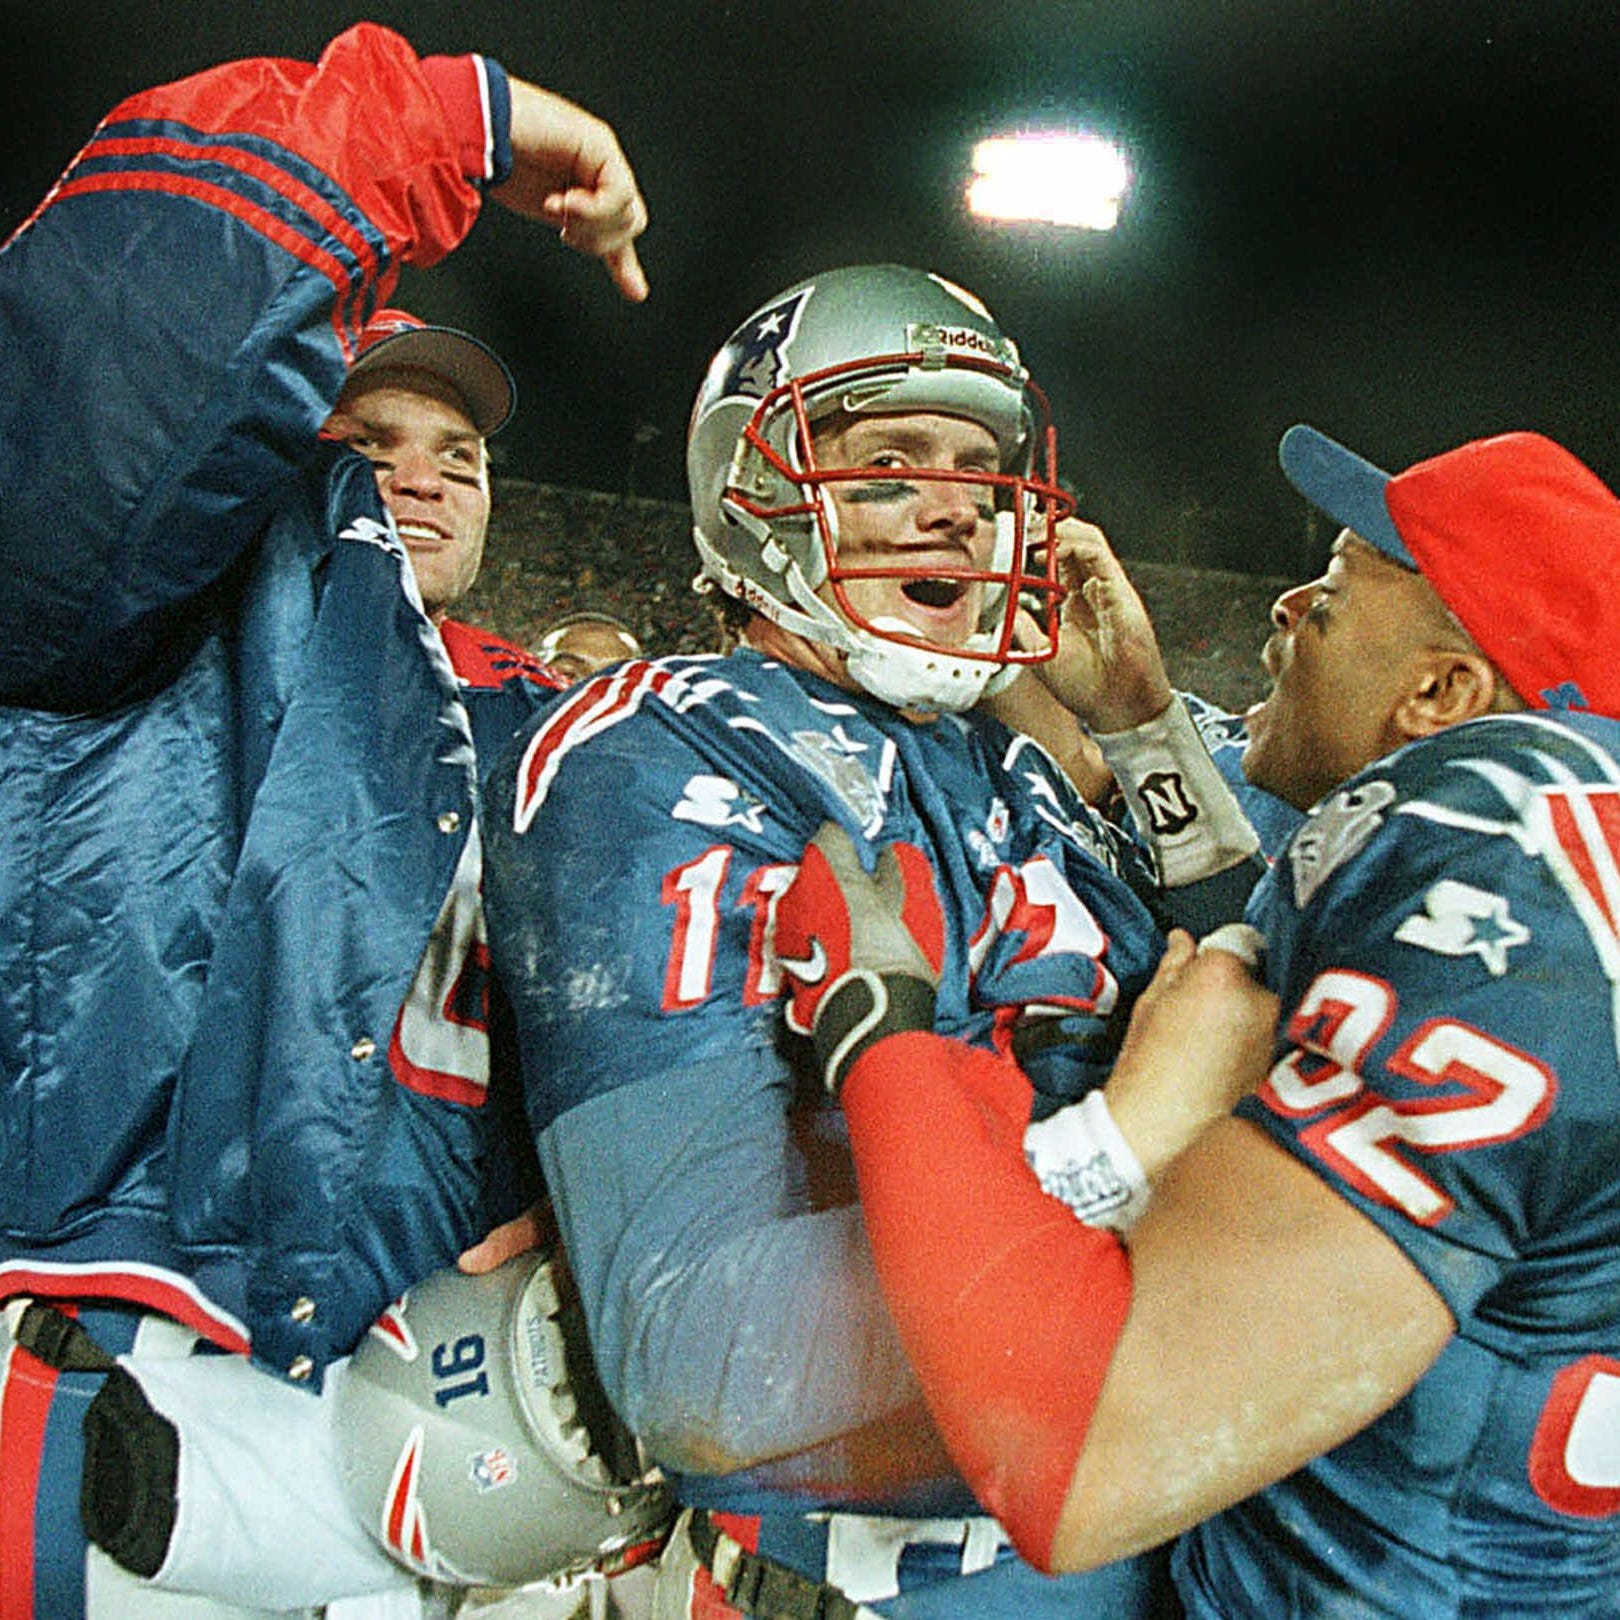 Drew Bledsoe in an NFL game with the Patriots.